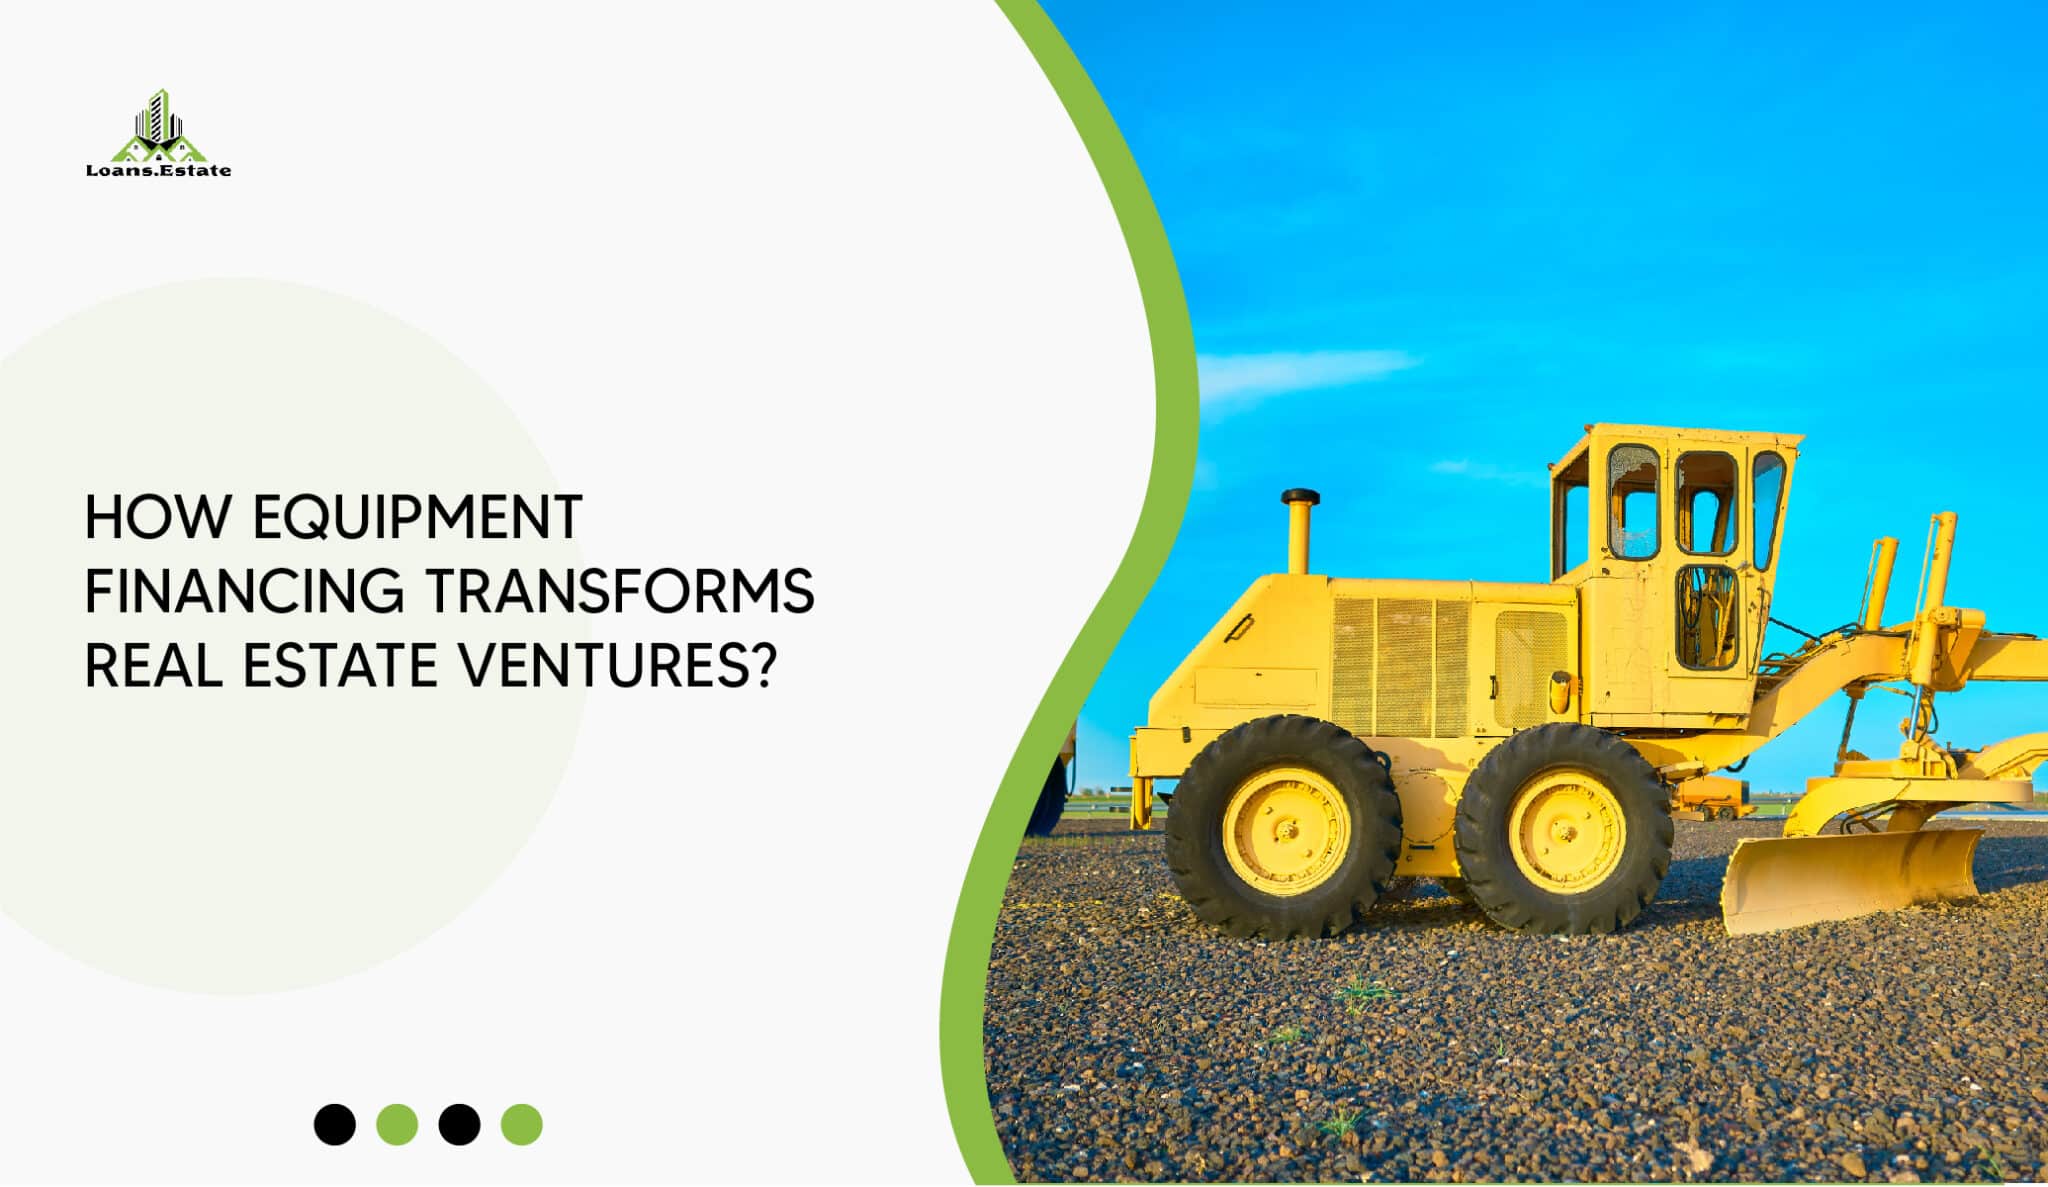 Empowering Growth: How Equipment Financing Transforms Real Estate Ventures